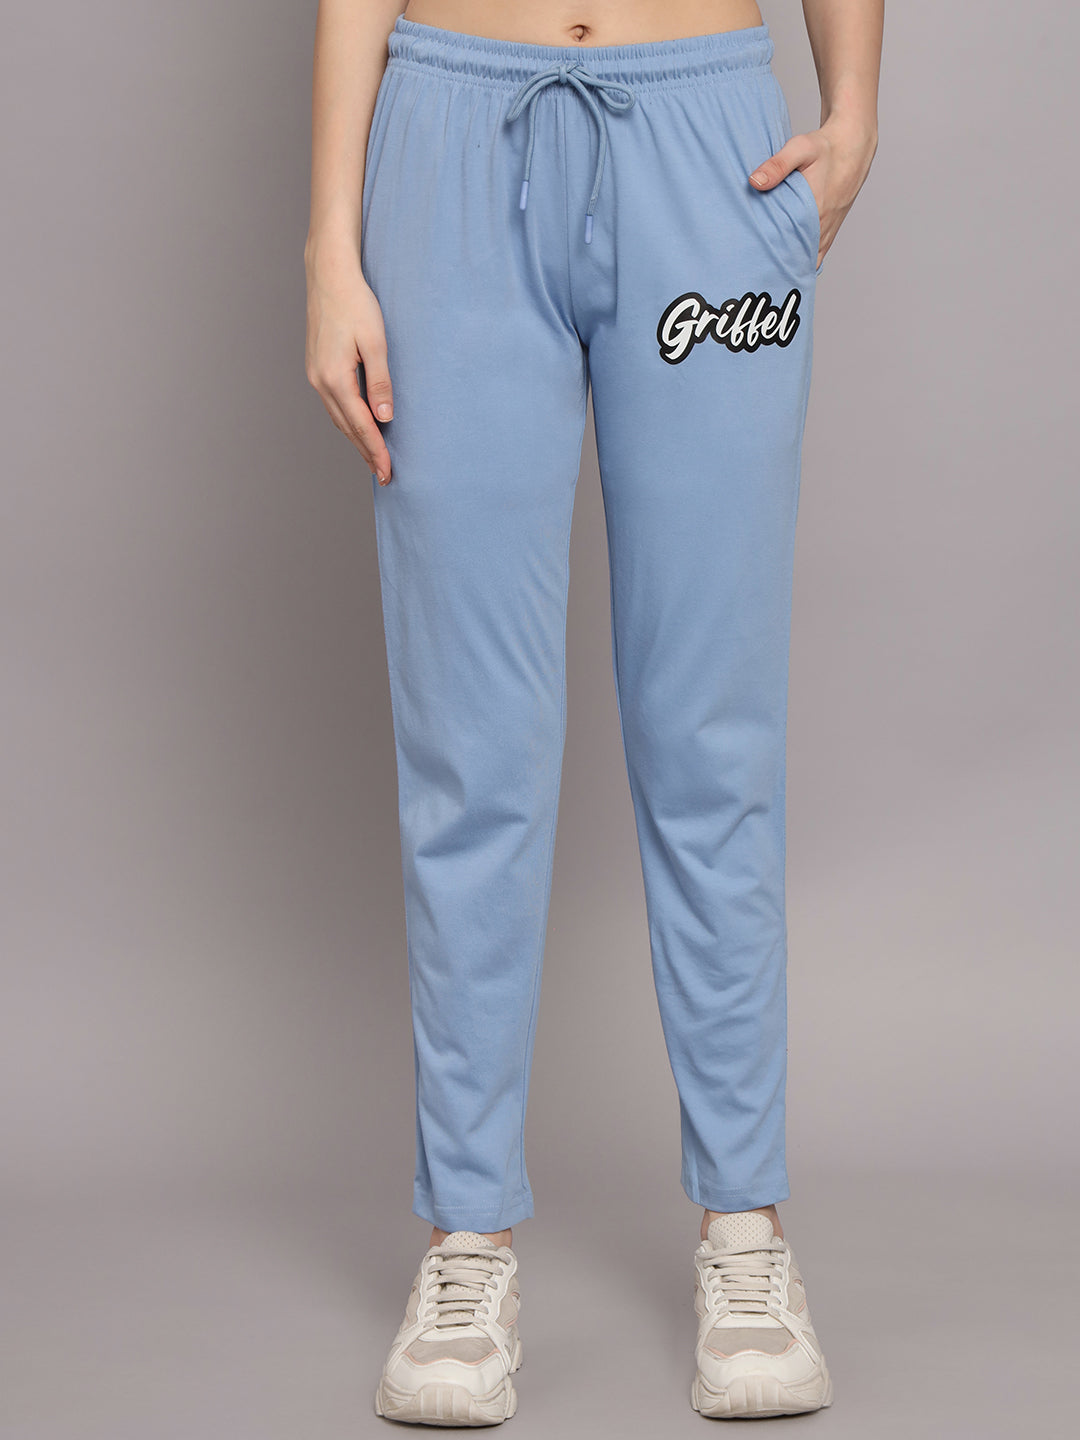 GRIFFEL Women Printed Oversized Loose fit Sky Blue T-shirt and Trackpant Set - griffel